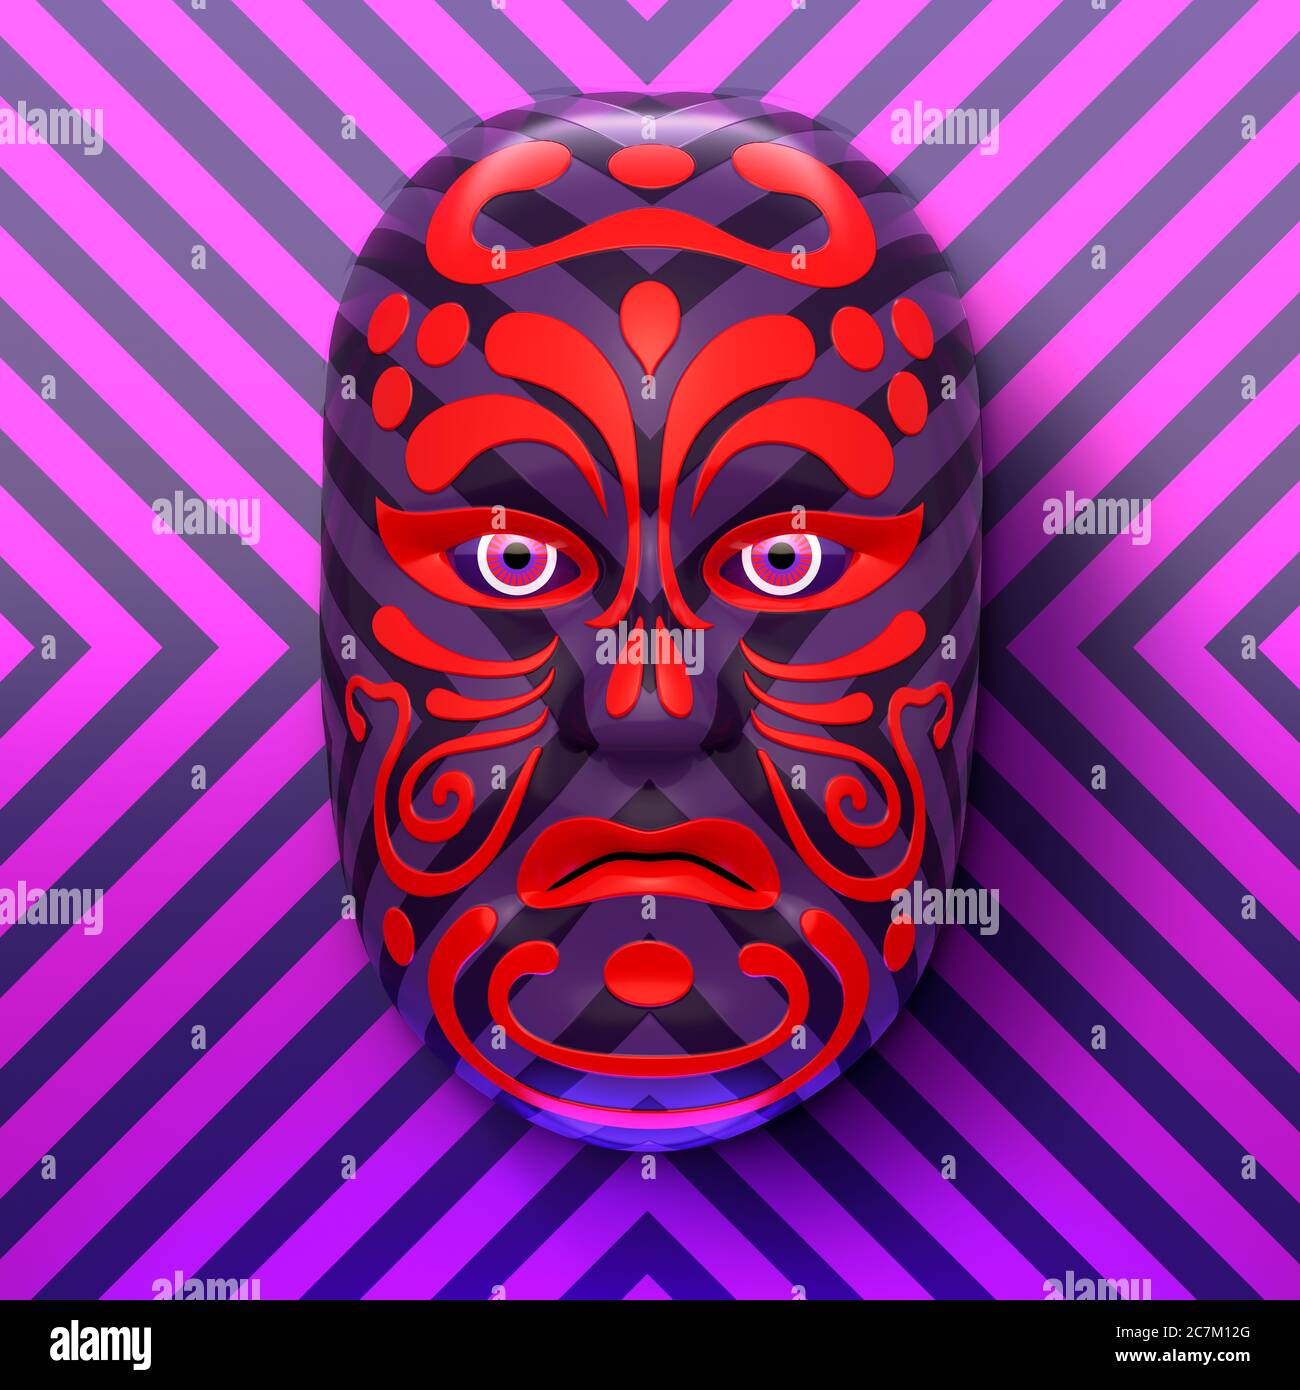 Asian theater mask with red ornaments against purple-pink striped background Stock Photo